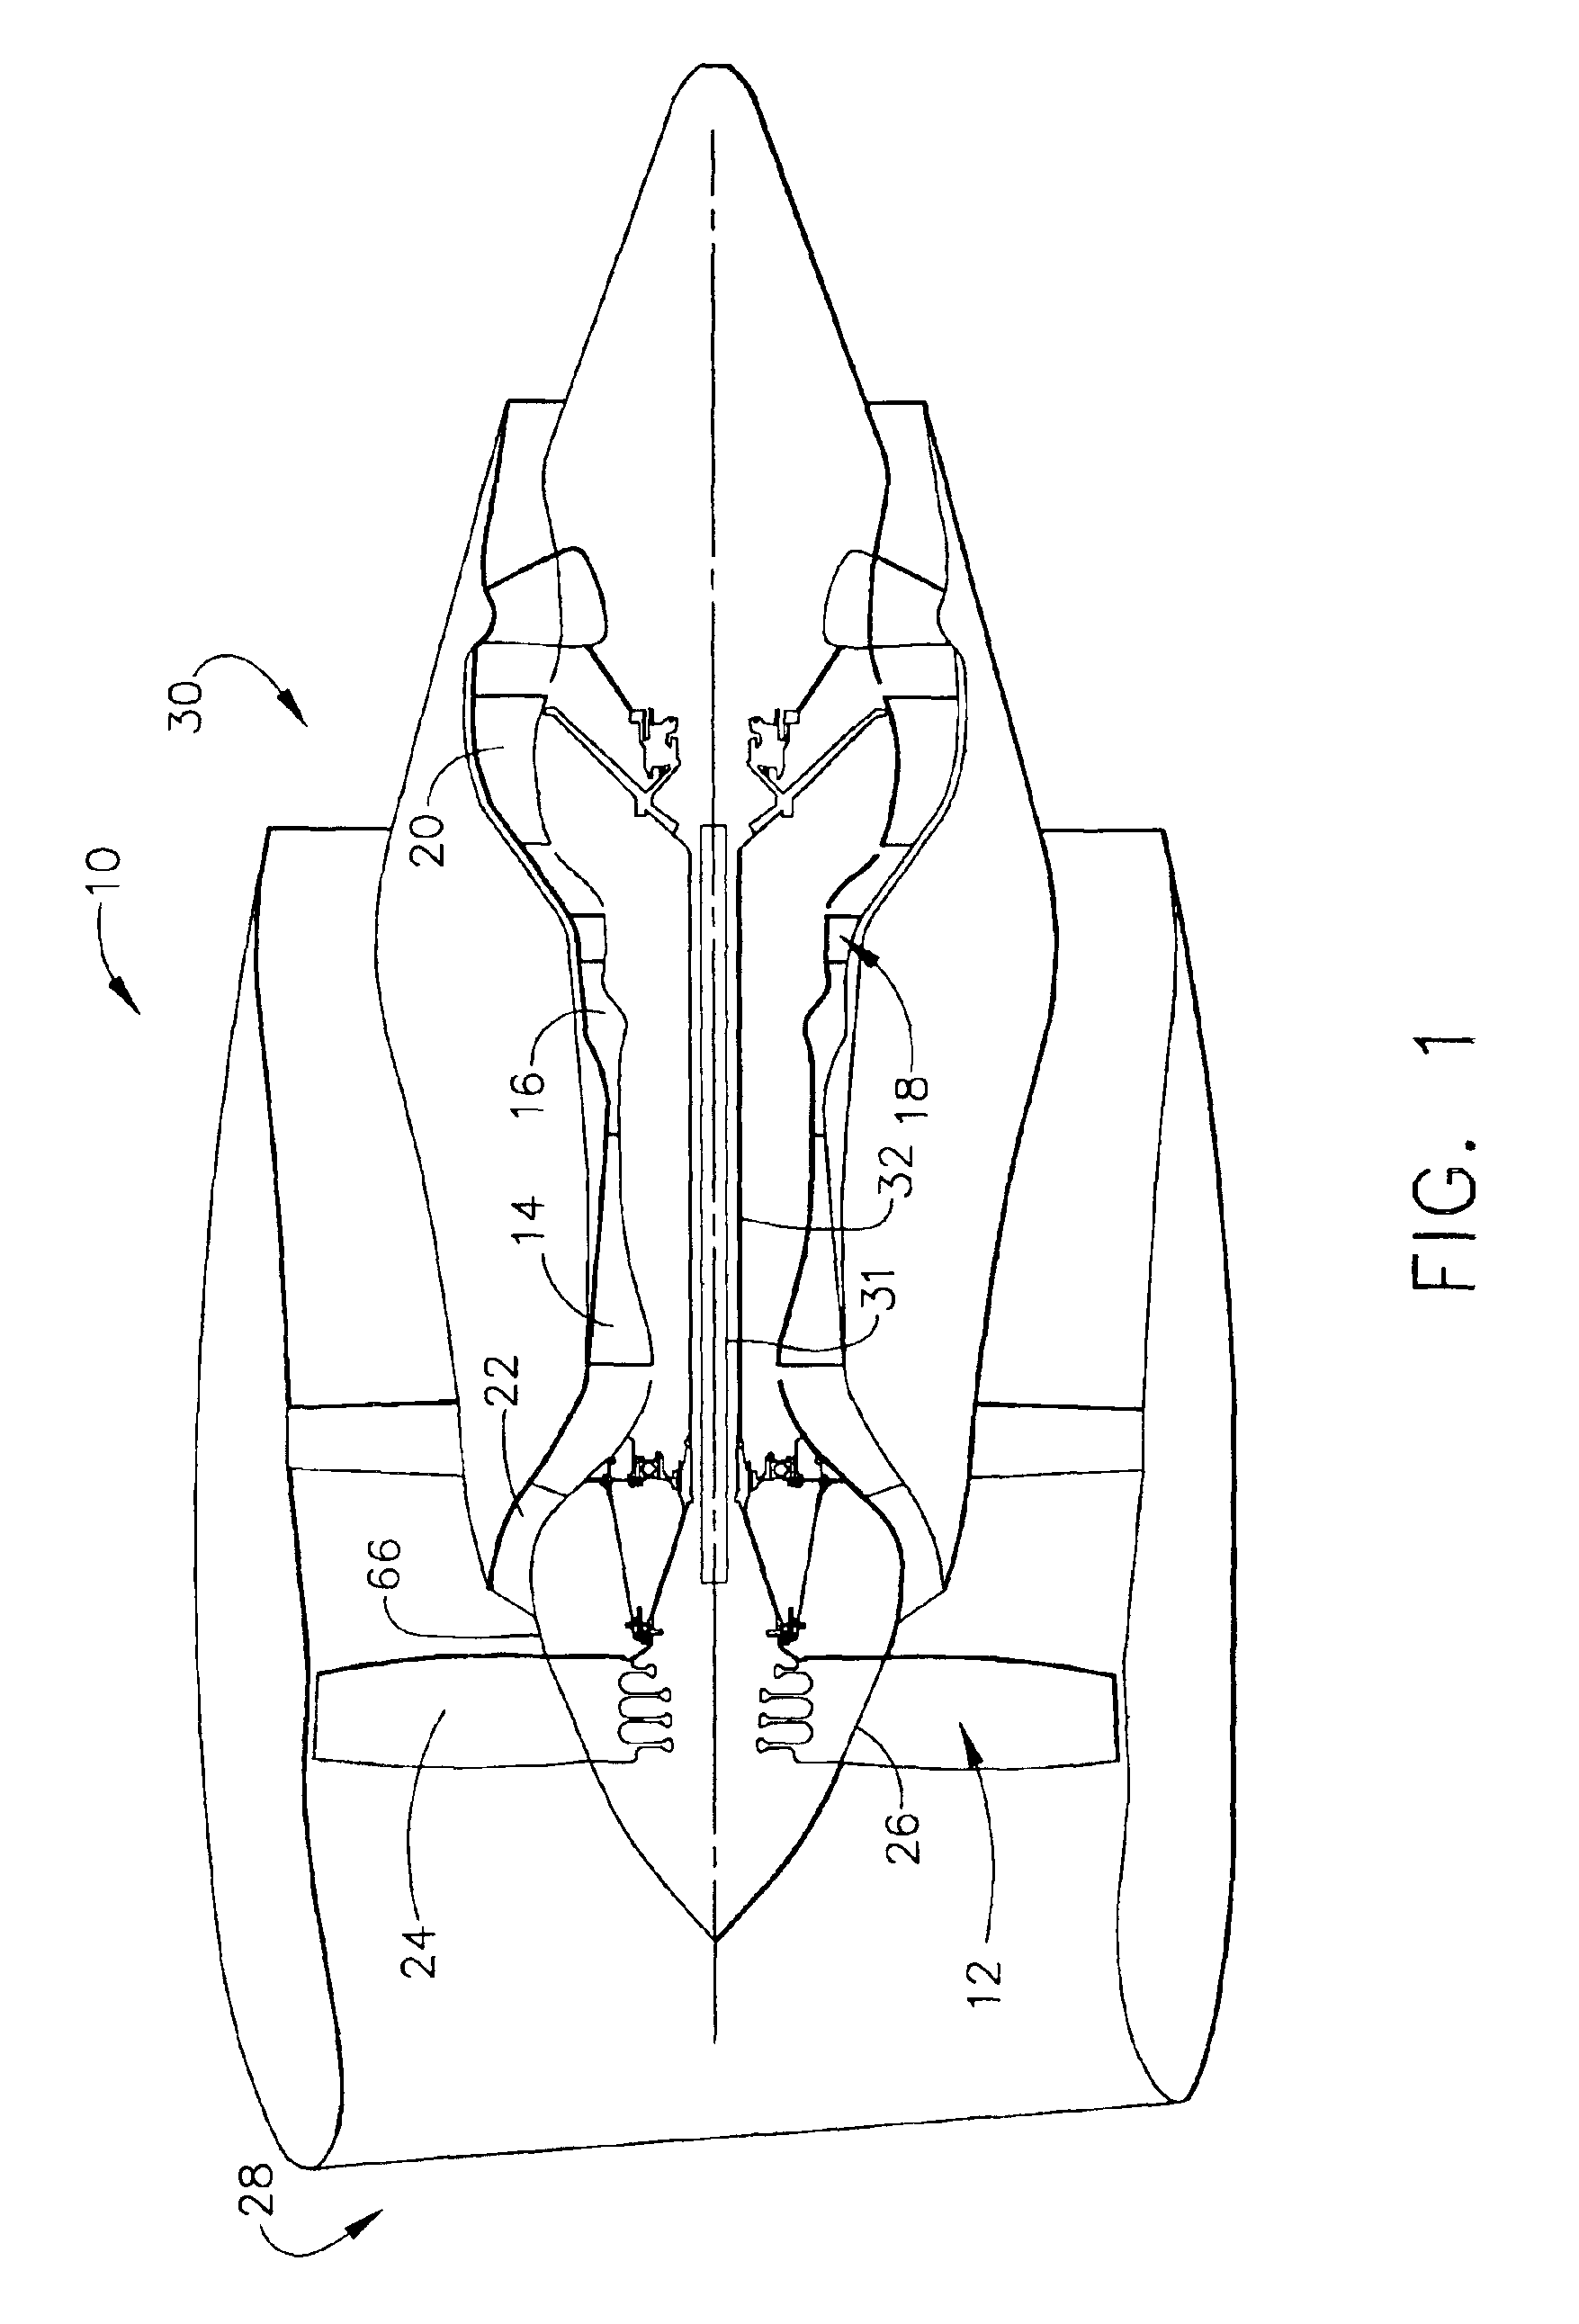 Methods and apparatus for cooling gas turbine engine rotor assemblies